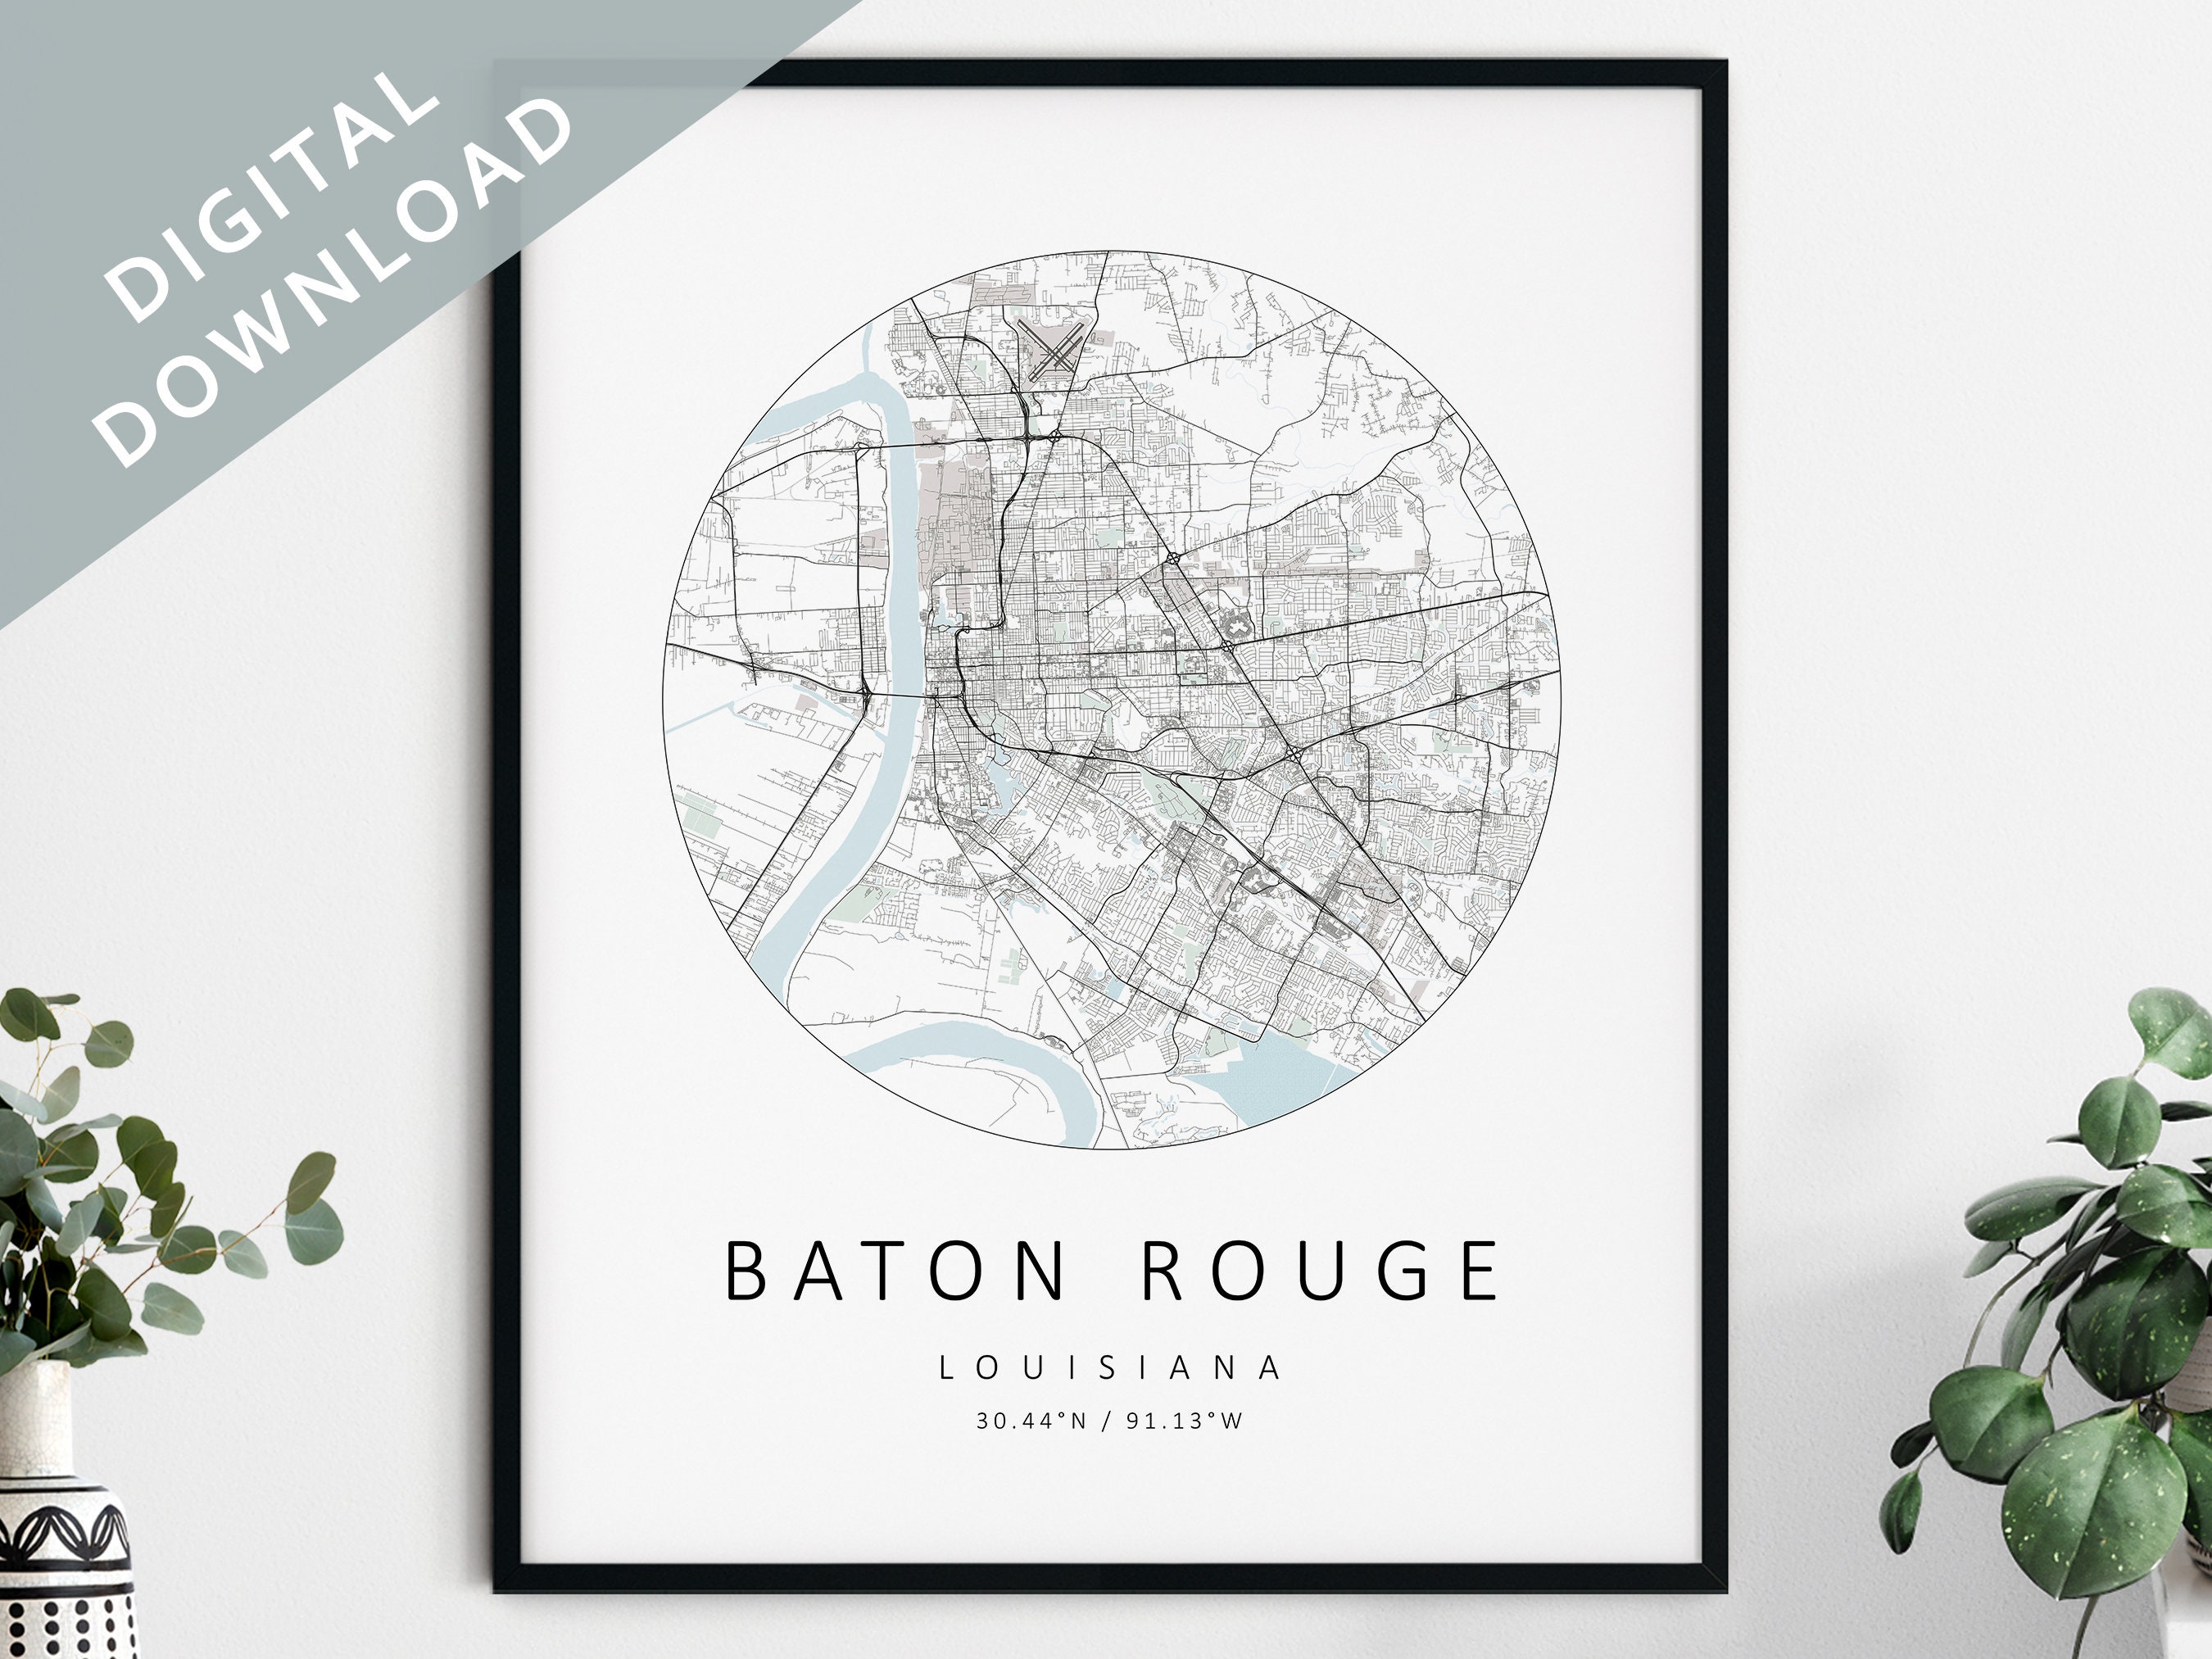 Bless international Vintage Louisiana Map by Dan Sproul Gallery-Wrapped  Canvas Giclée